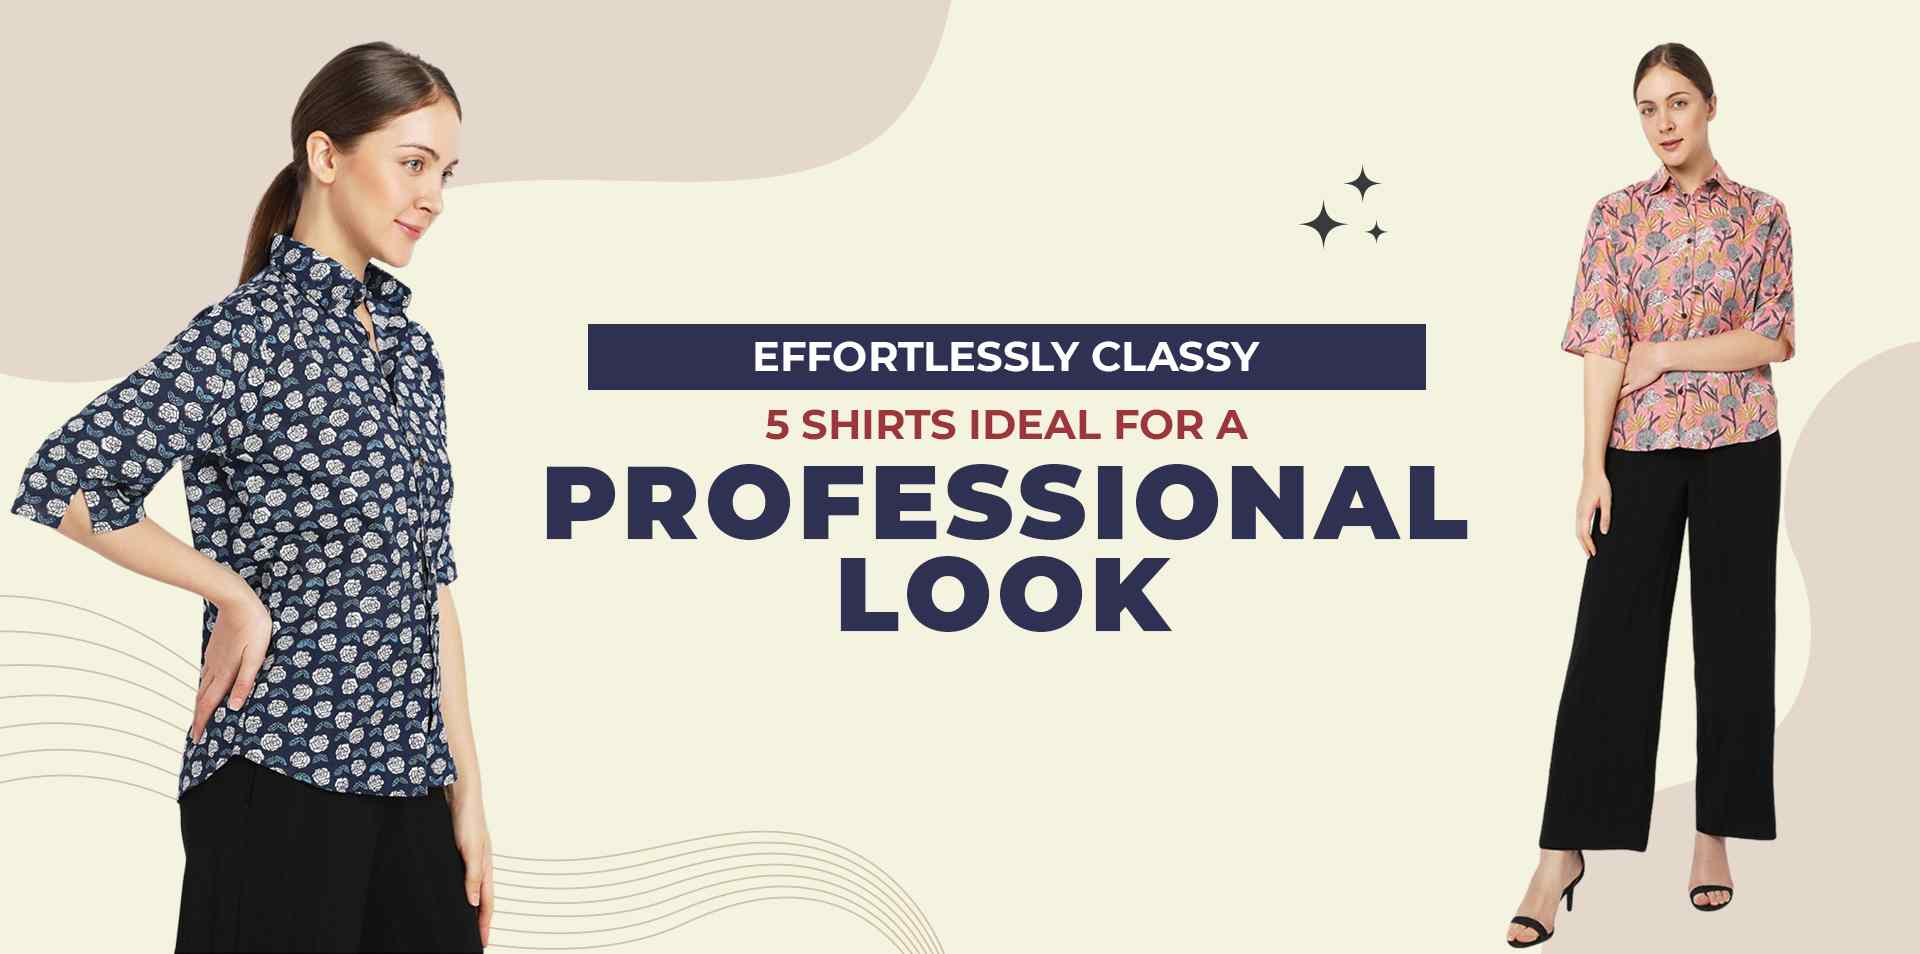 Effortlessly Classy: 5 Shirts Ideal for a Professional Look